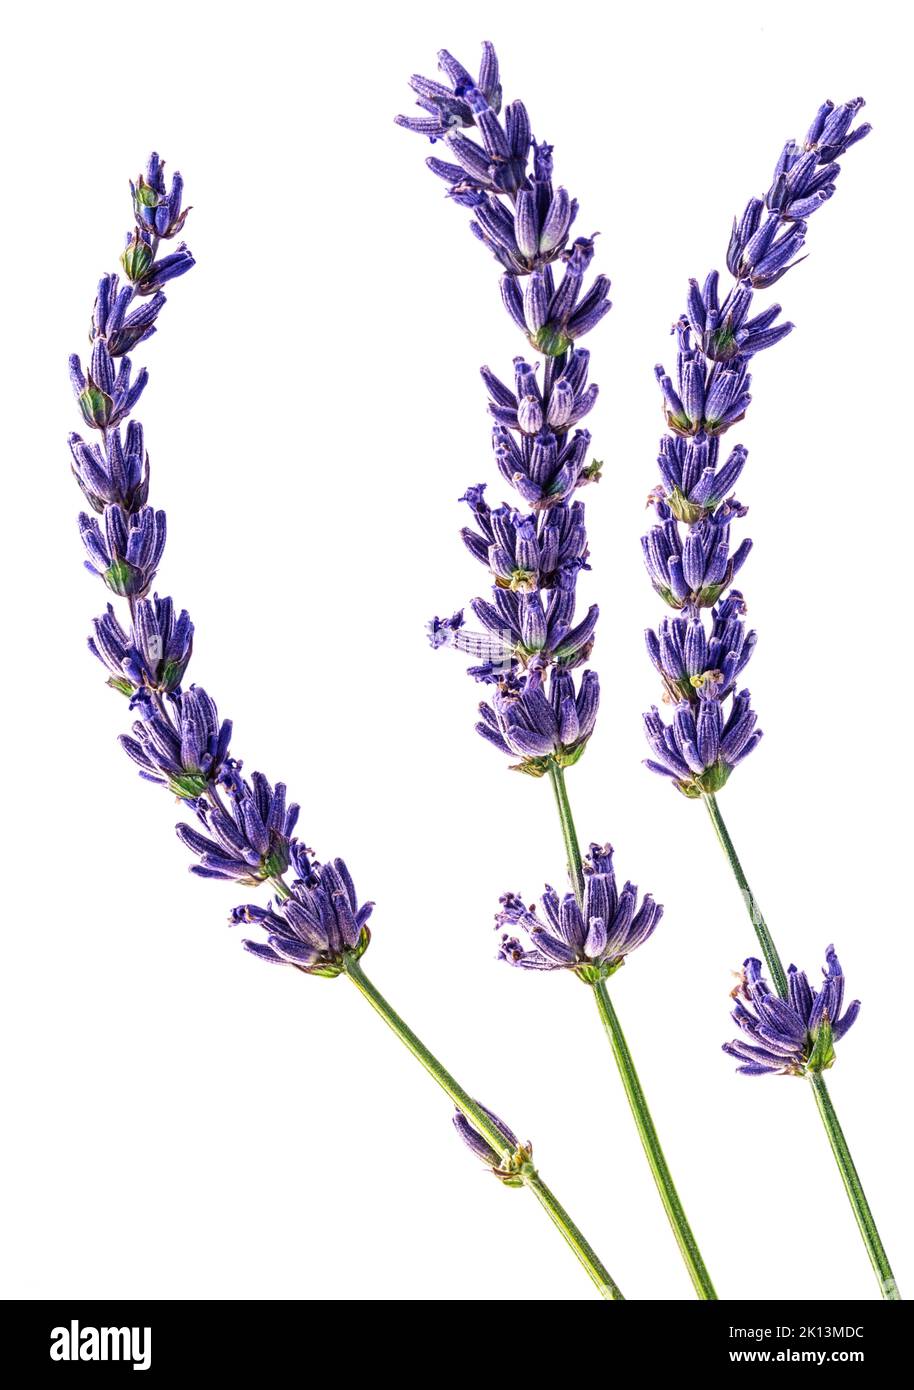 Three lavender flowers close up isolated on white background. Stock Photo